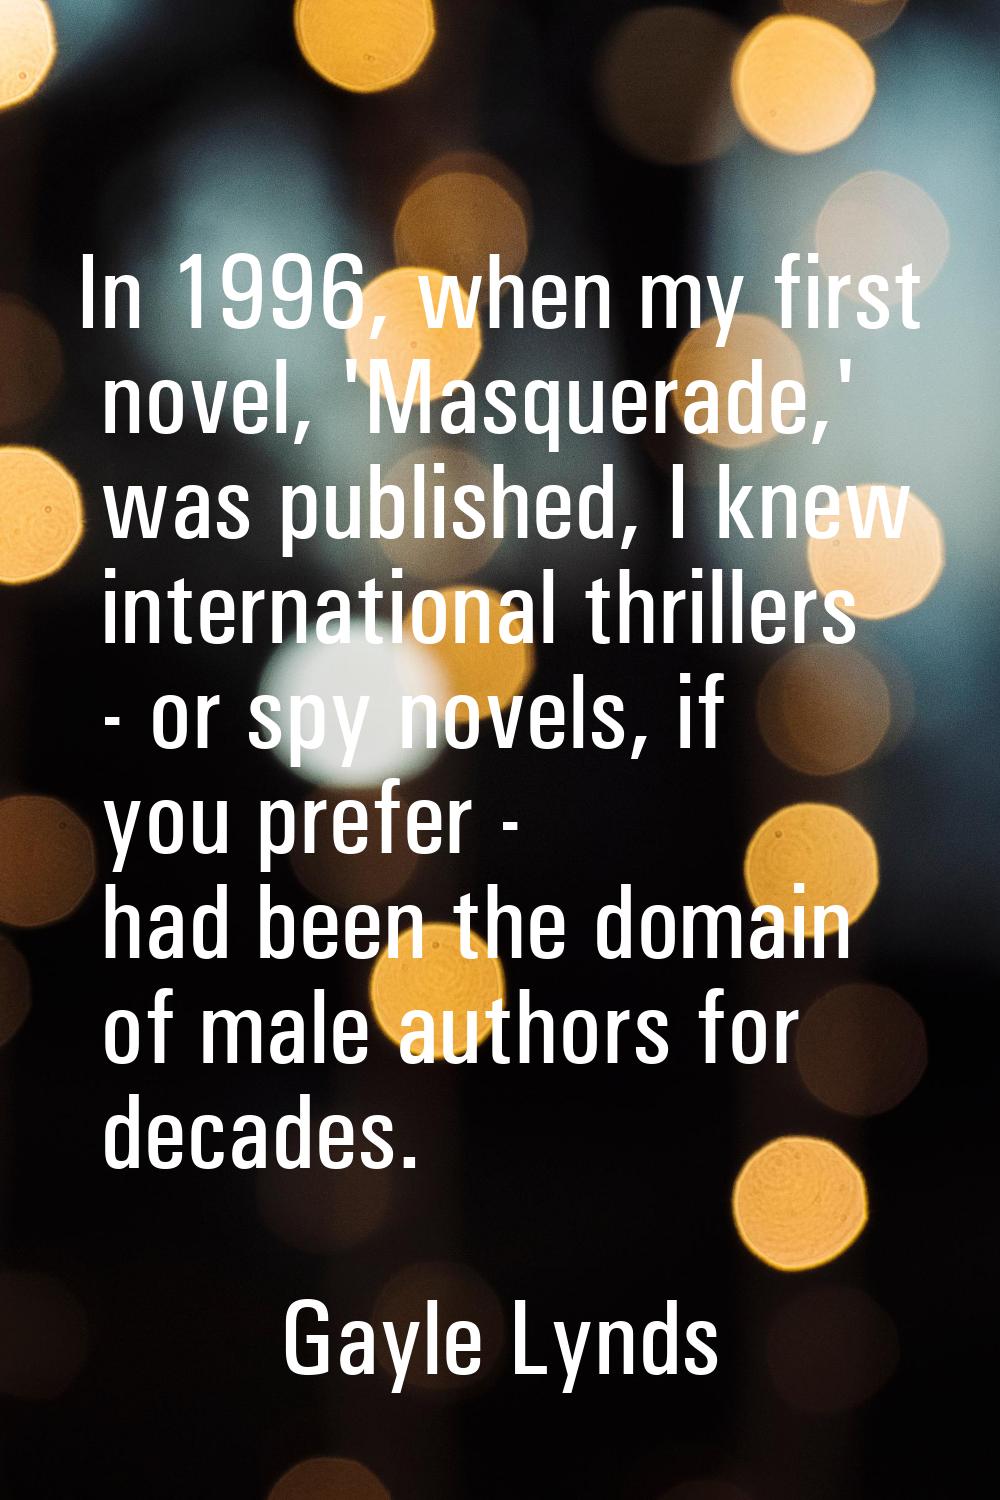 In 1996, when my first novel, 'Masquerade,' was published, I knew international thrillers - or spy 